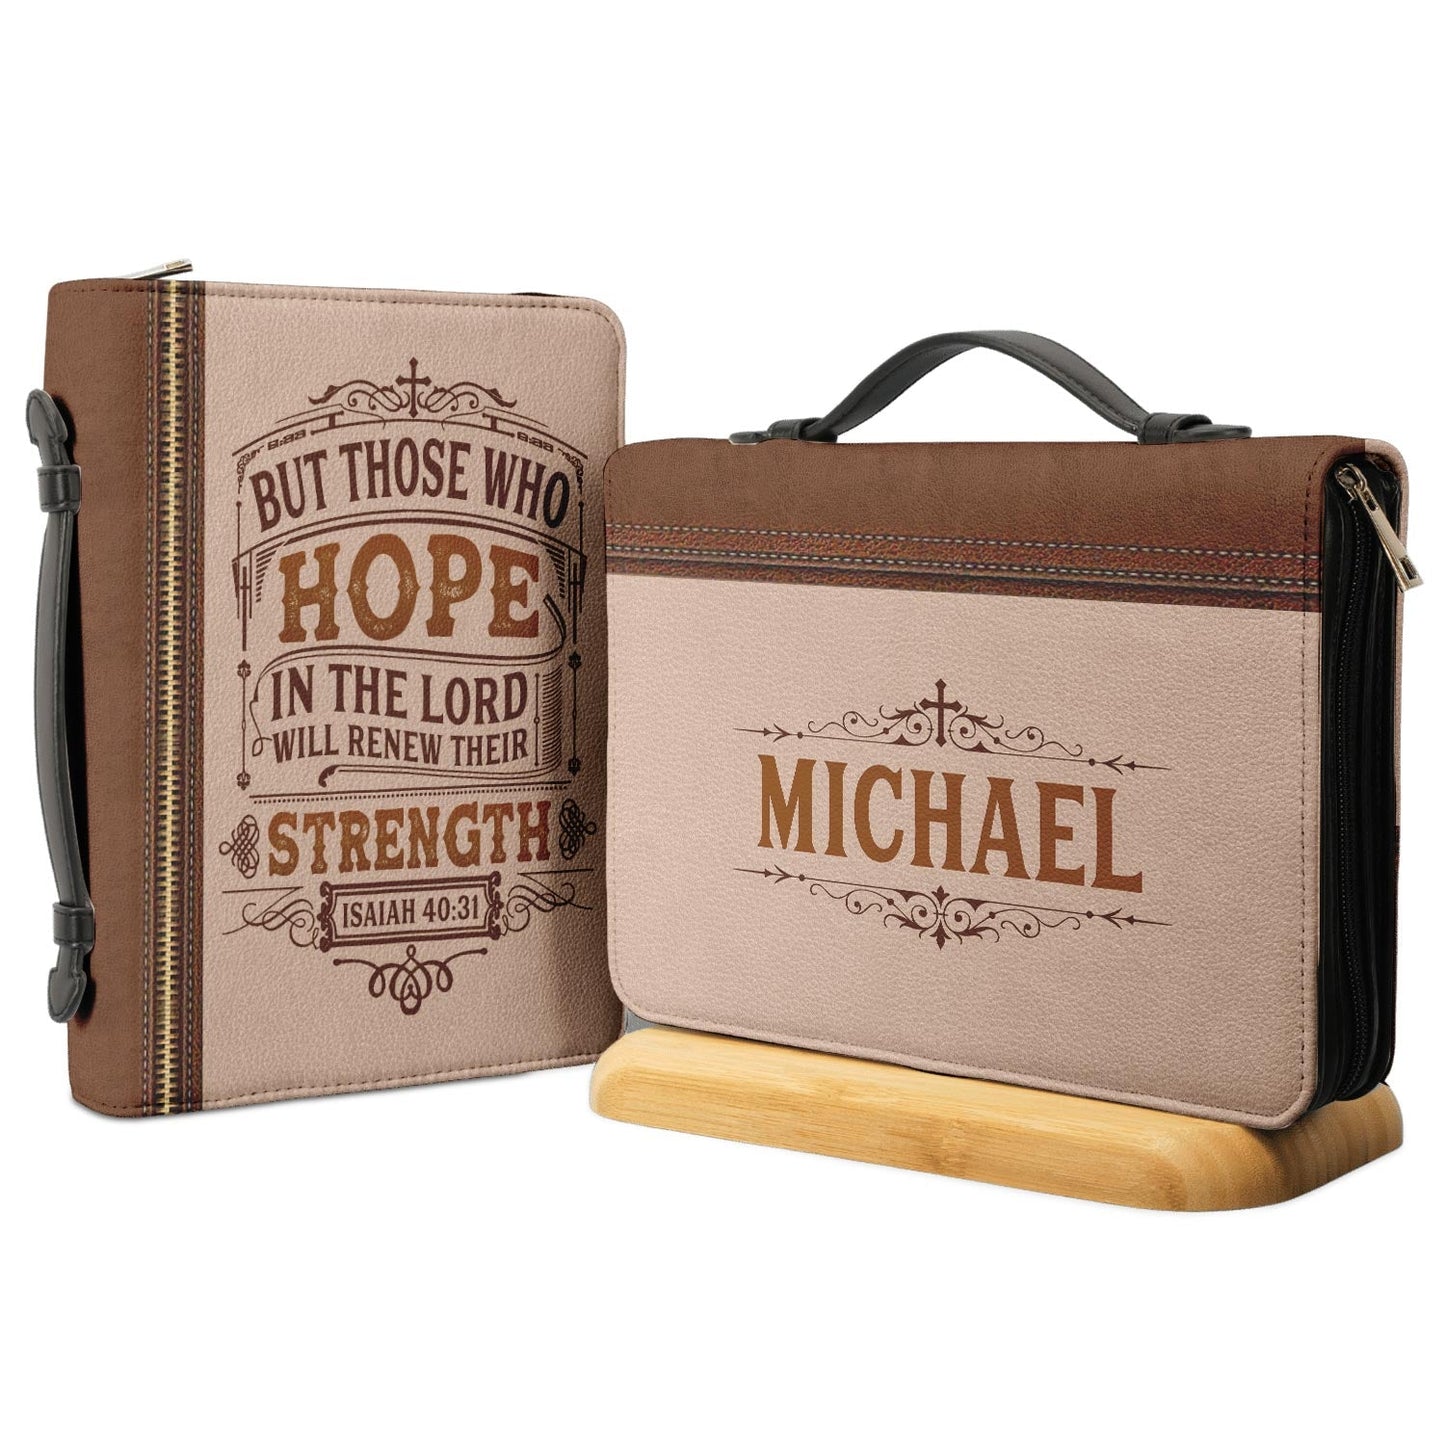  Personalized Bible Cover - But Those Who Hope In The Lord Will Renew Their Strength Isaiah 40 31 Bible Cover for Christians